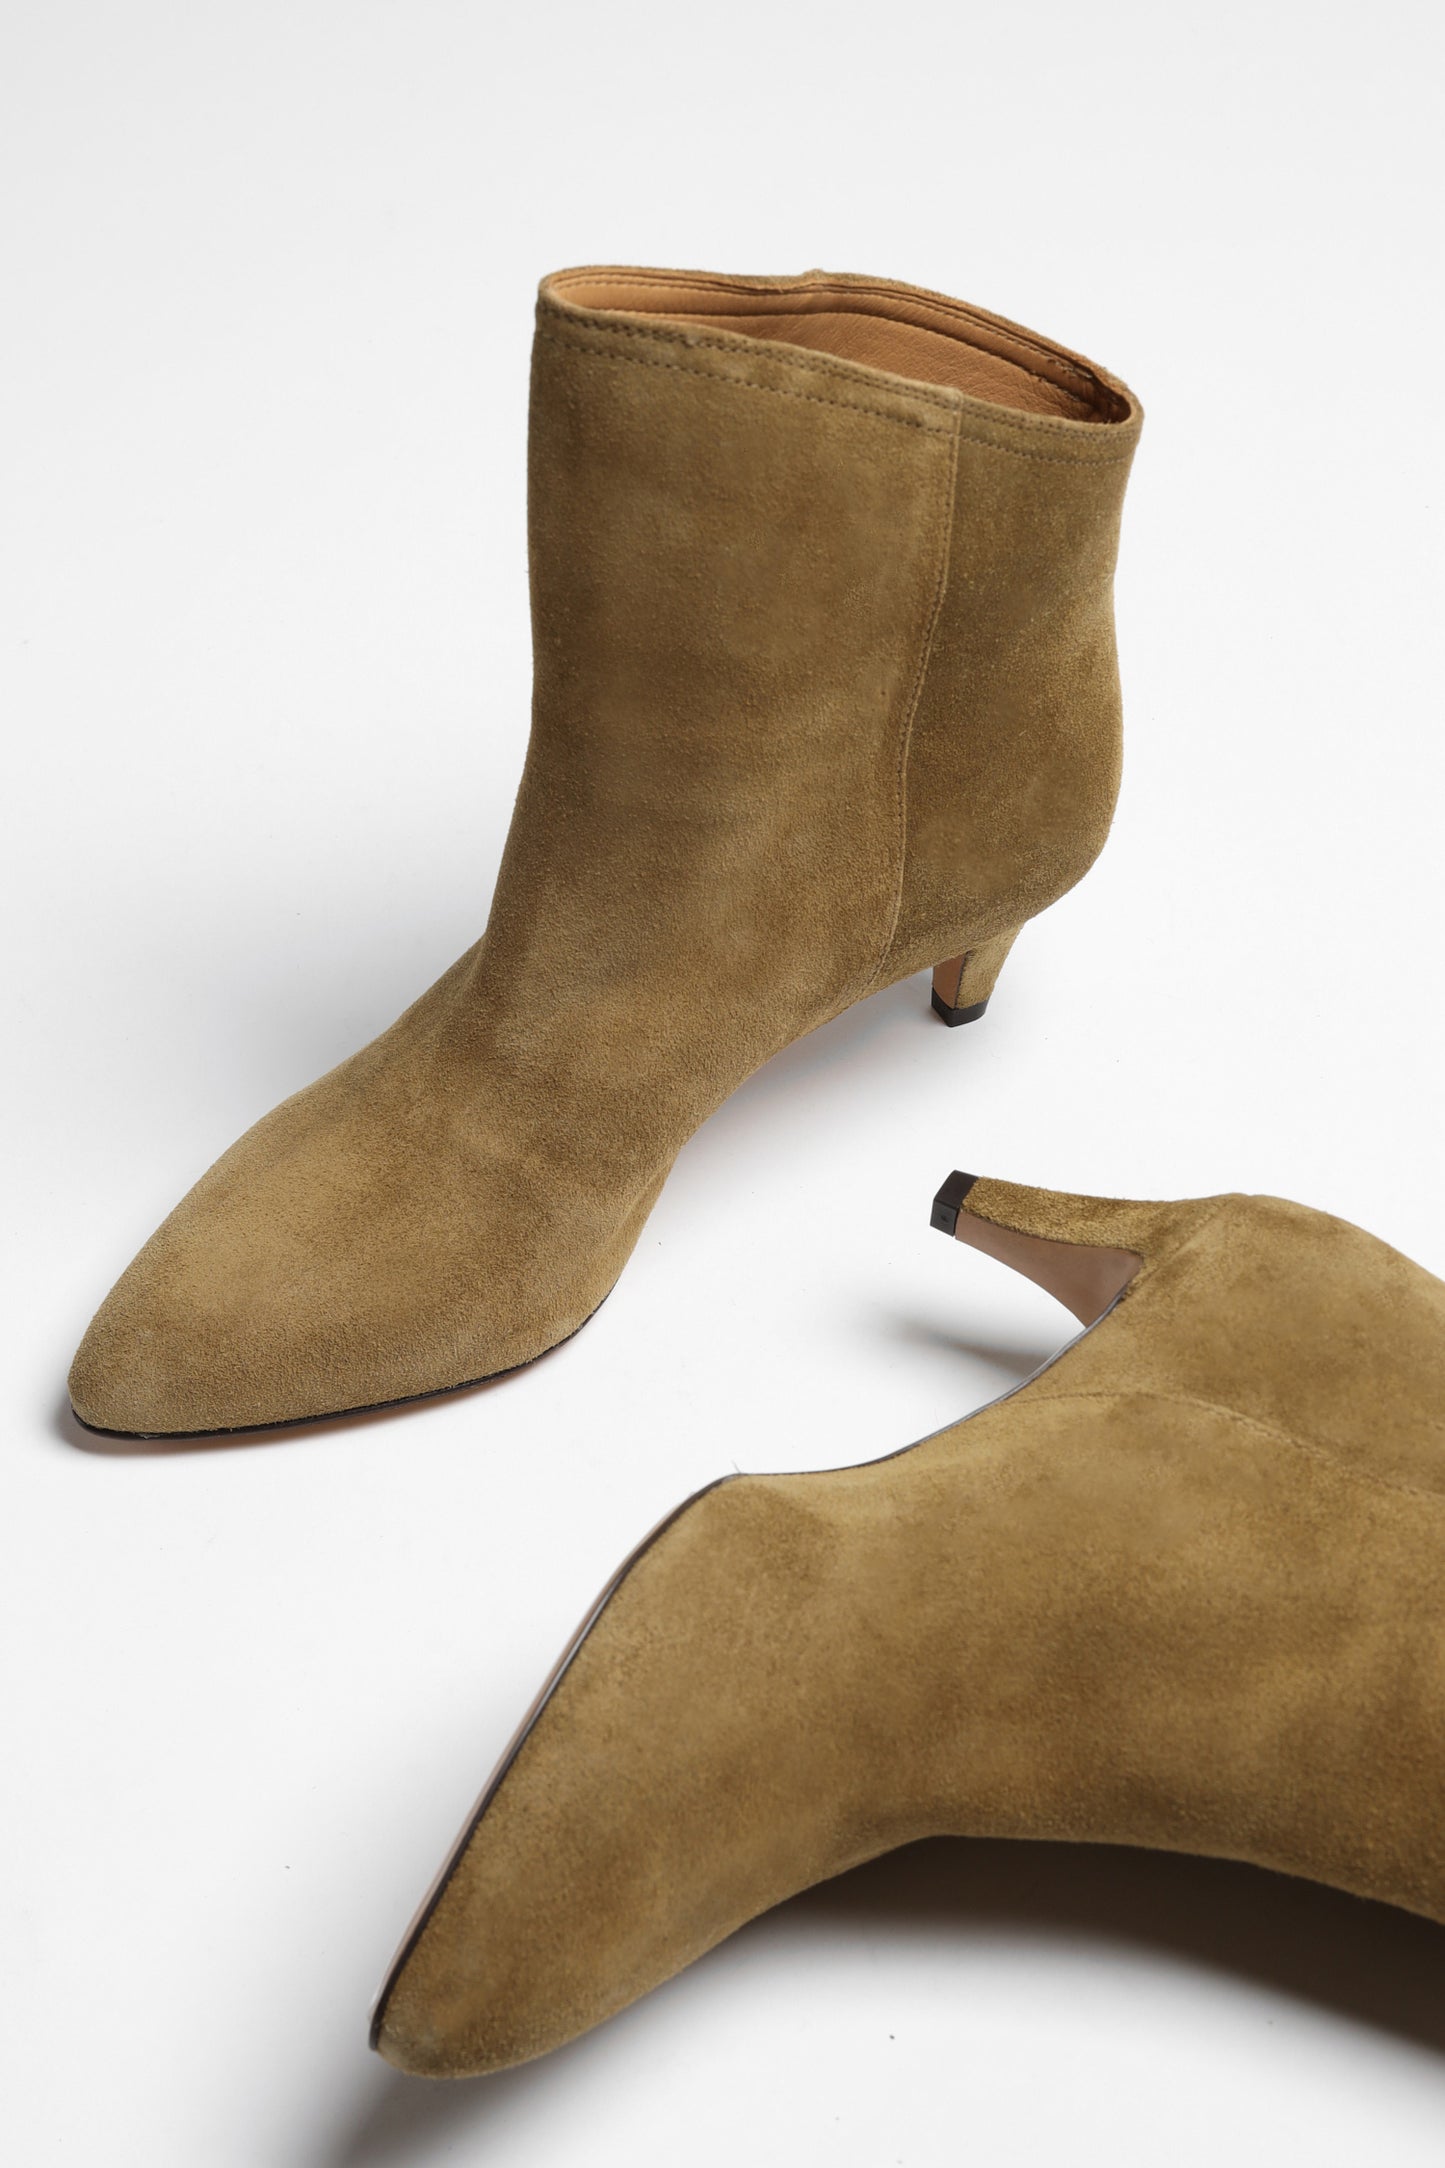 Boots Dripi in TaupeIsabel Marant - Anita Hass